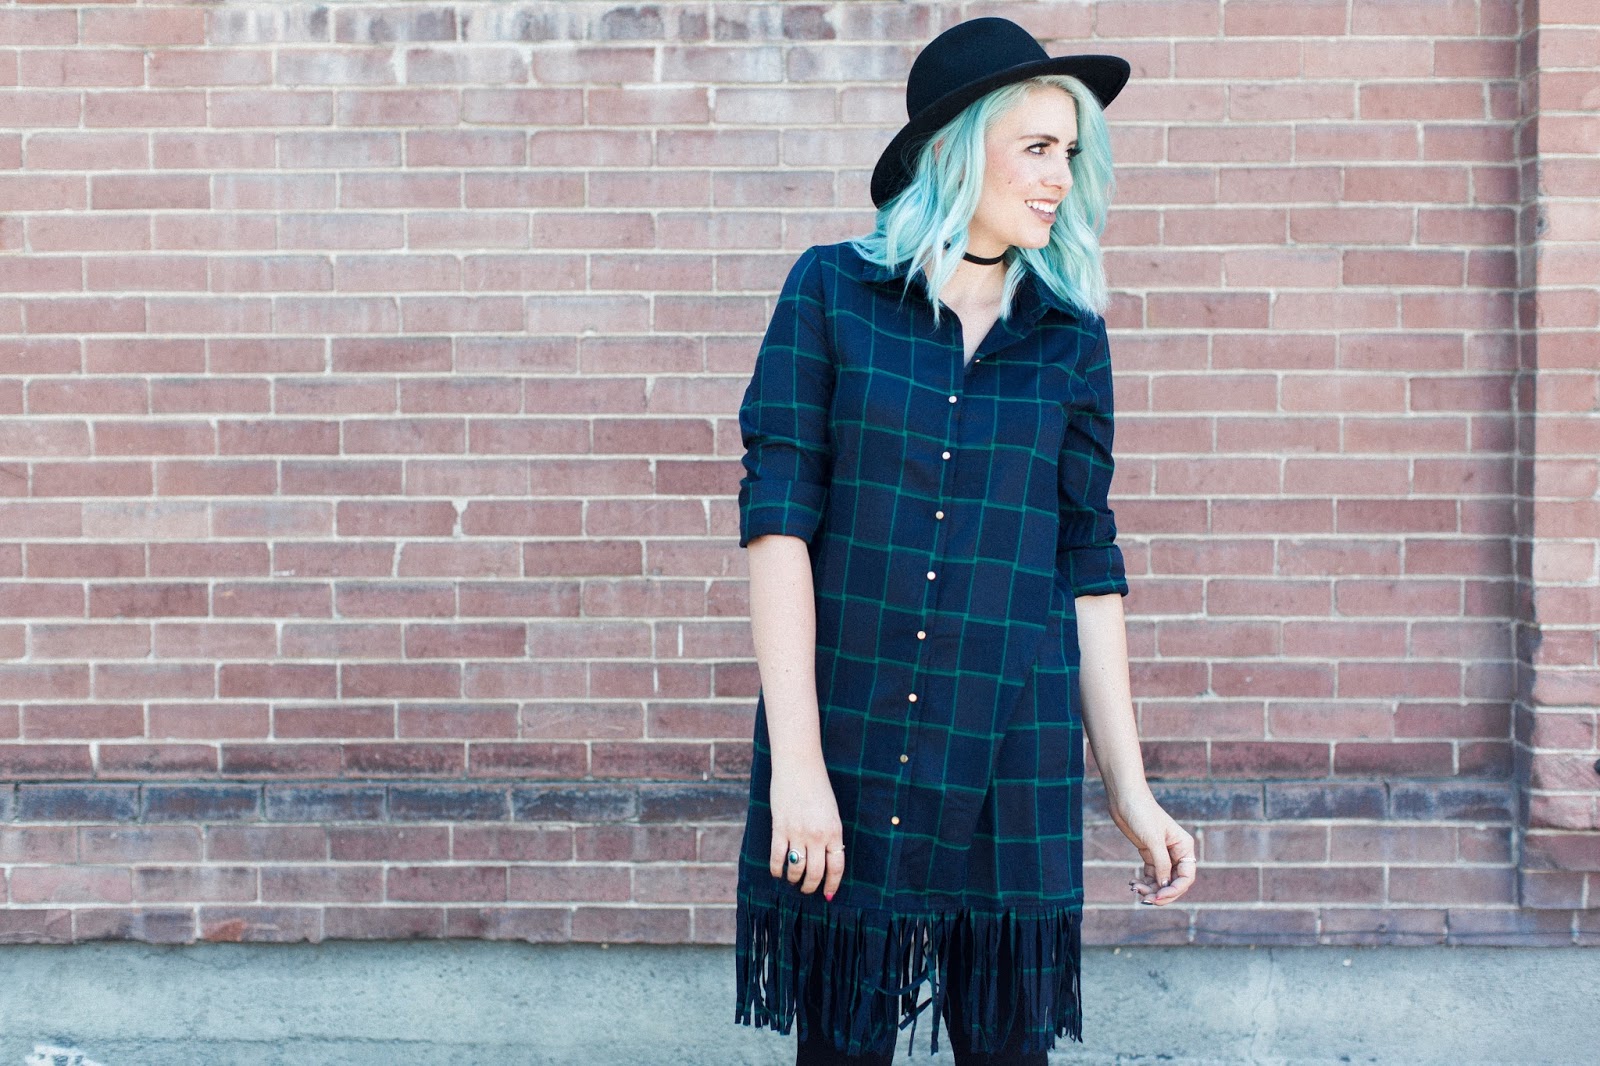 Modest Outfit, Fall Dress, Fringe